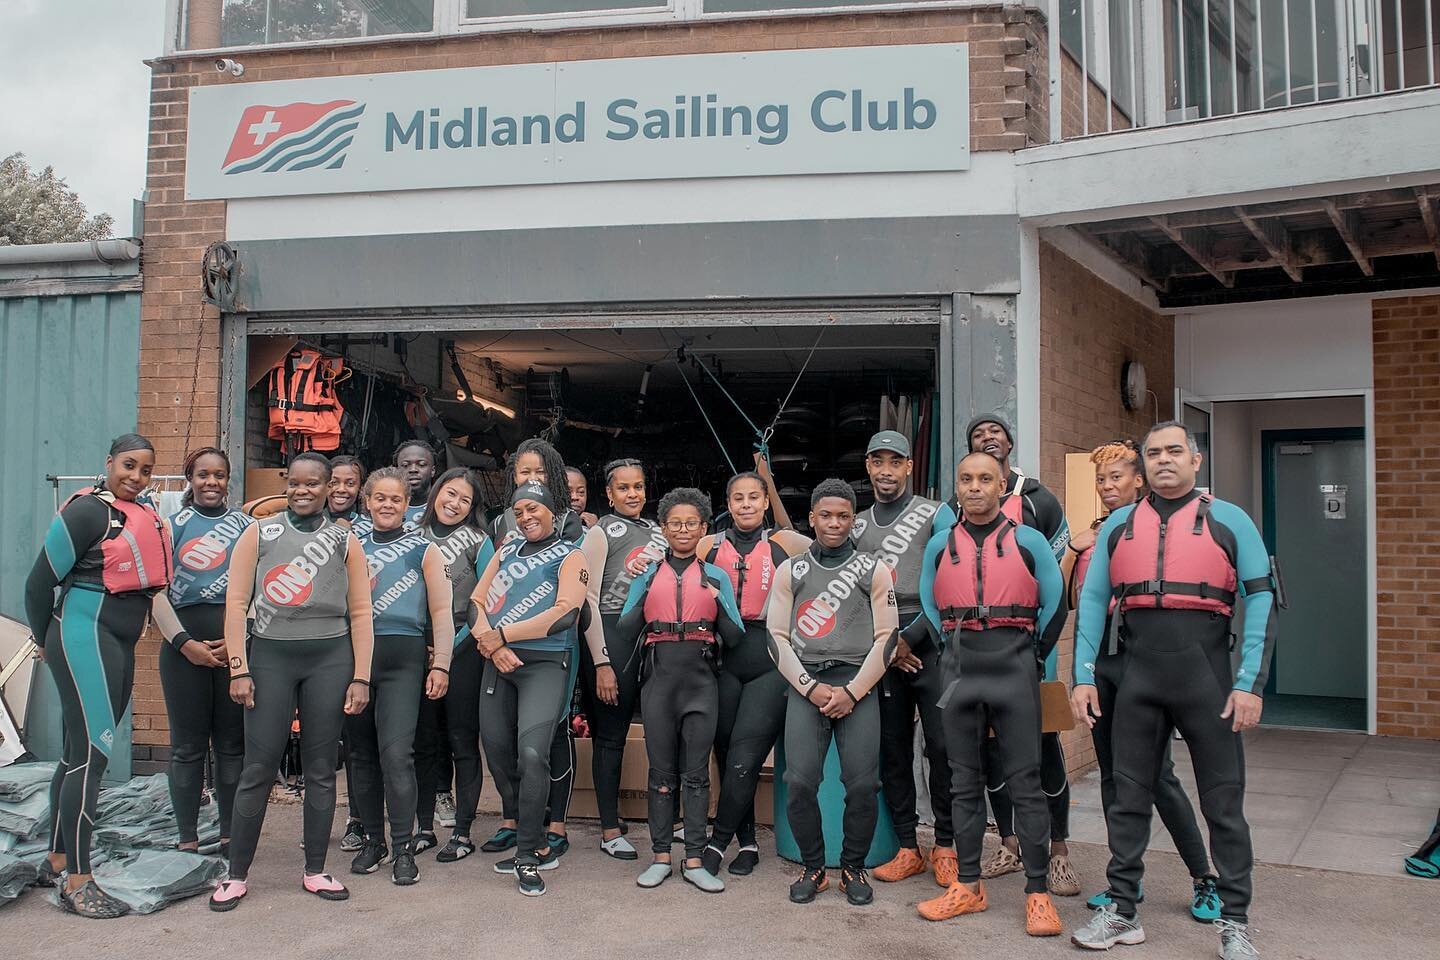 In September we ran Water Sports Days @midlandsailing with @hellyhansensailing @jaiiiloui and @itsgreatoutthere 

These sessions were to Strengthen Individuals Knowledge and Skills on water safety in the diverse community and to give opportunities to